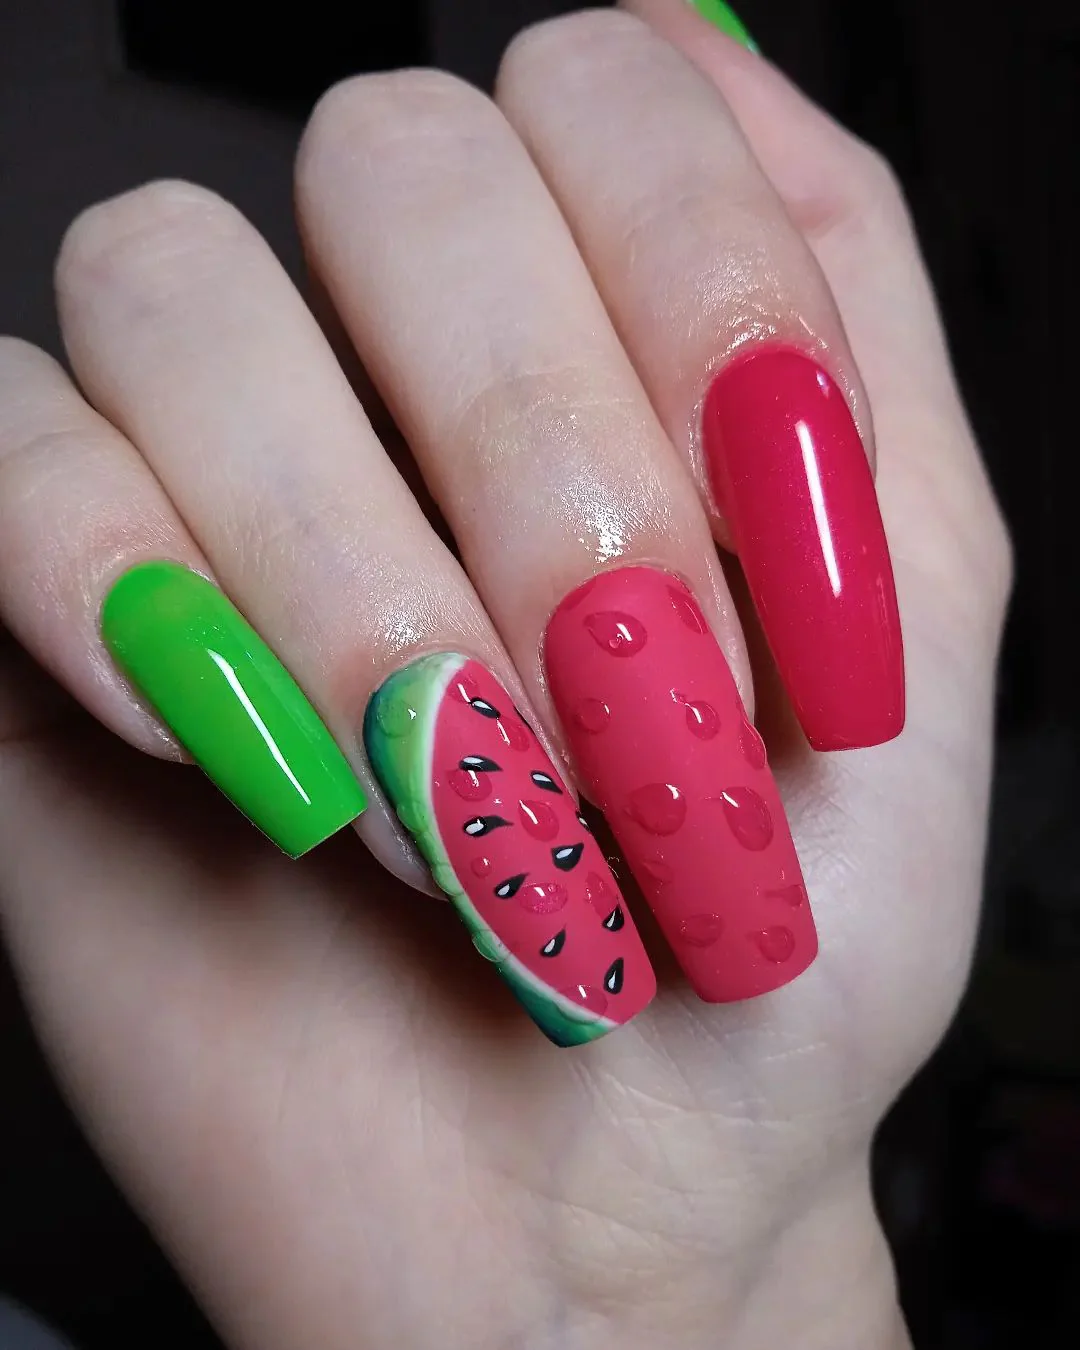 Pin by Emily Rodriguez on nail art | Nails, Watermelon nails, August nails